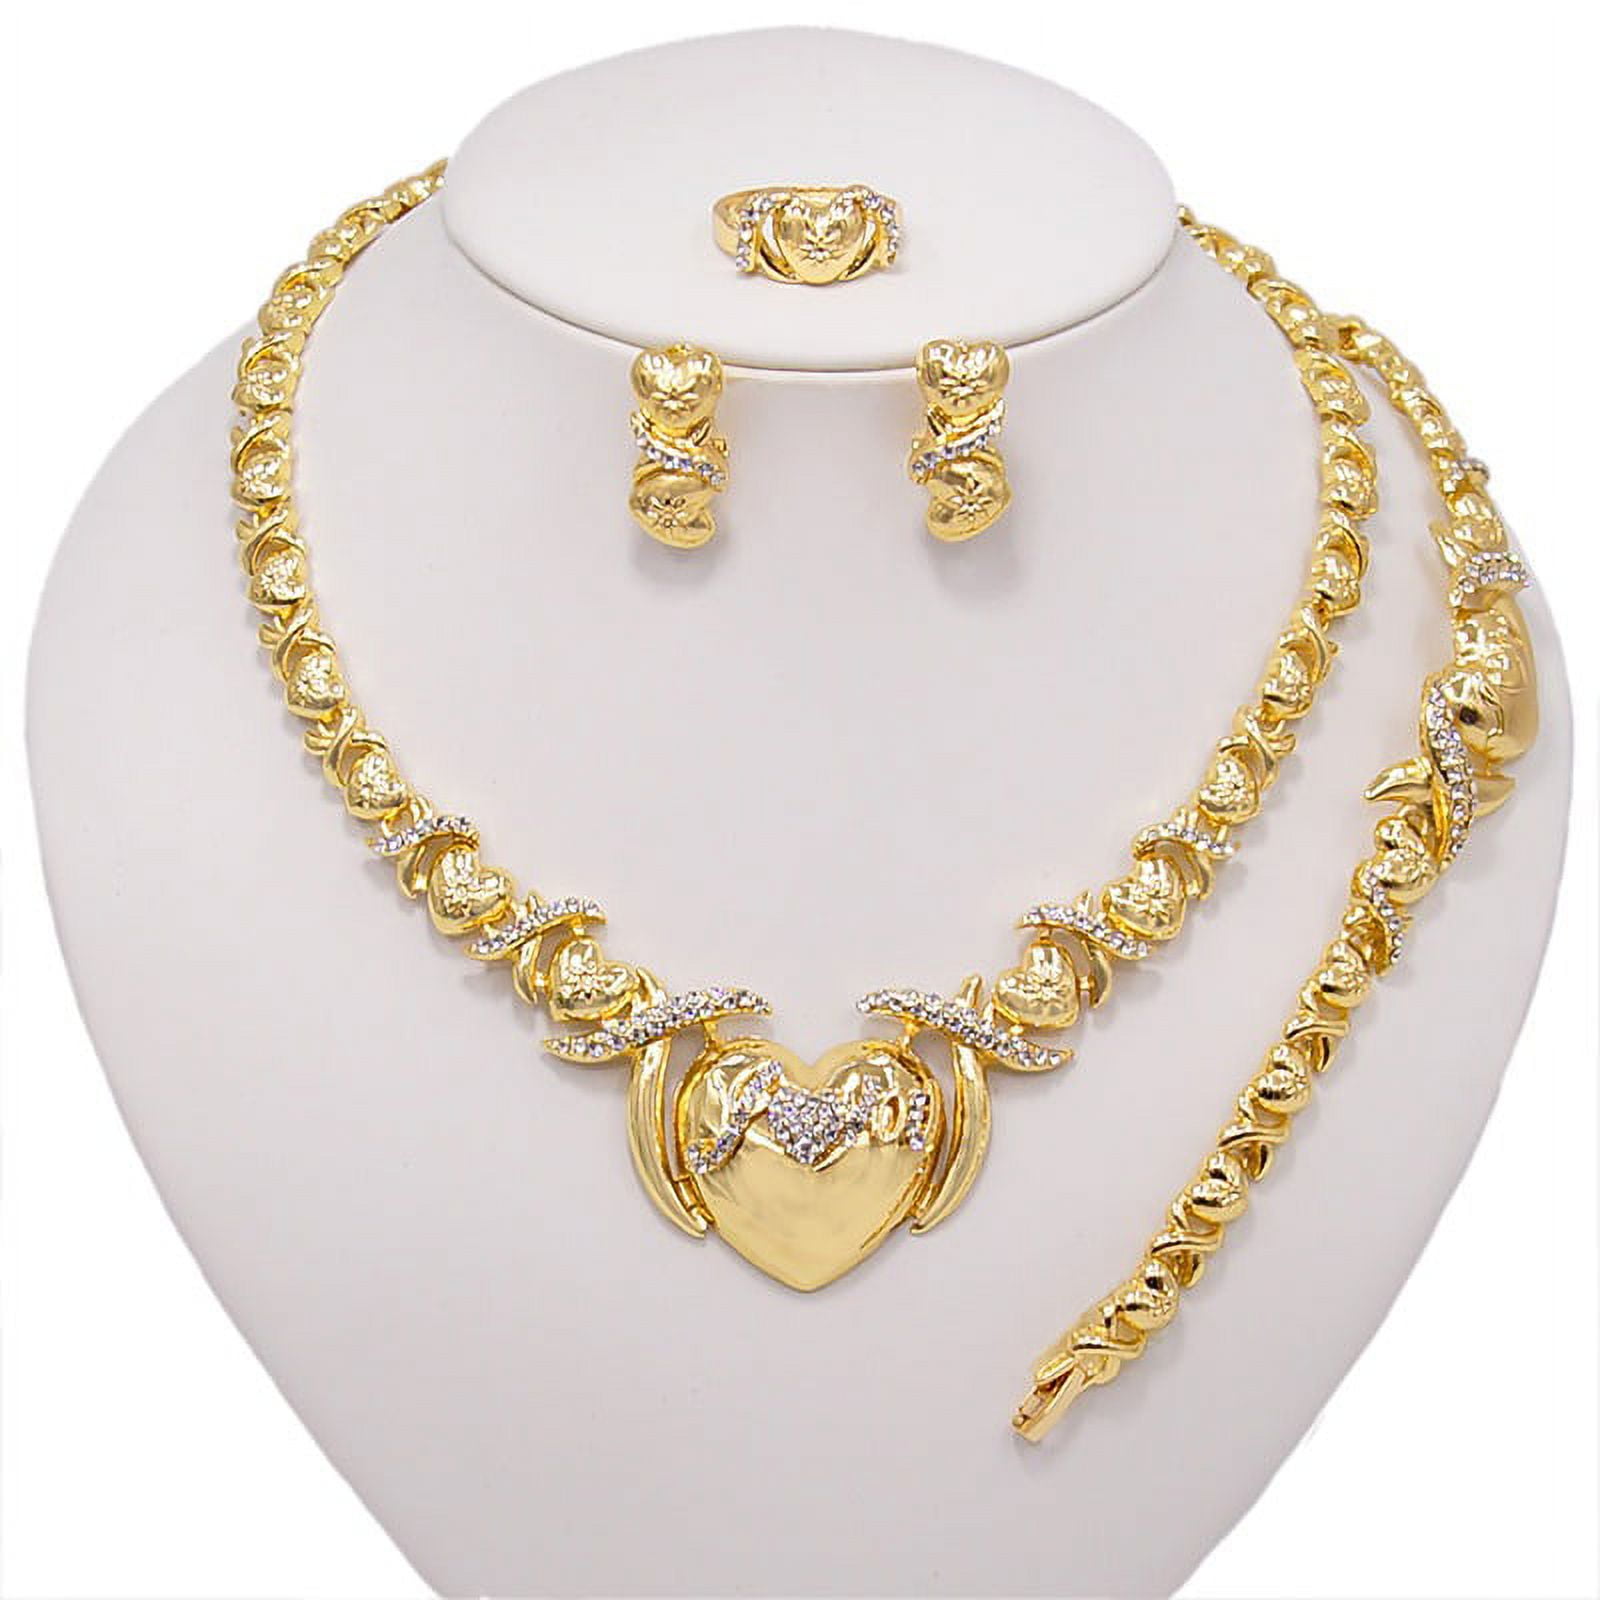 Women's Hugs & Kisses XOXO Heart Charm Necklace Set 18k Layered Real Gold  Plated Includes Necklace Bracelet Earrings Ring Set